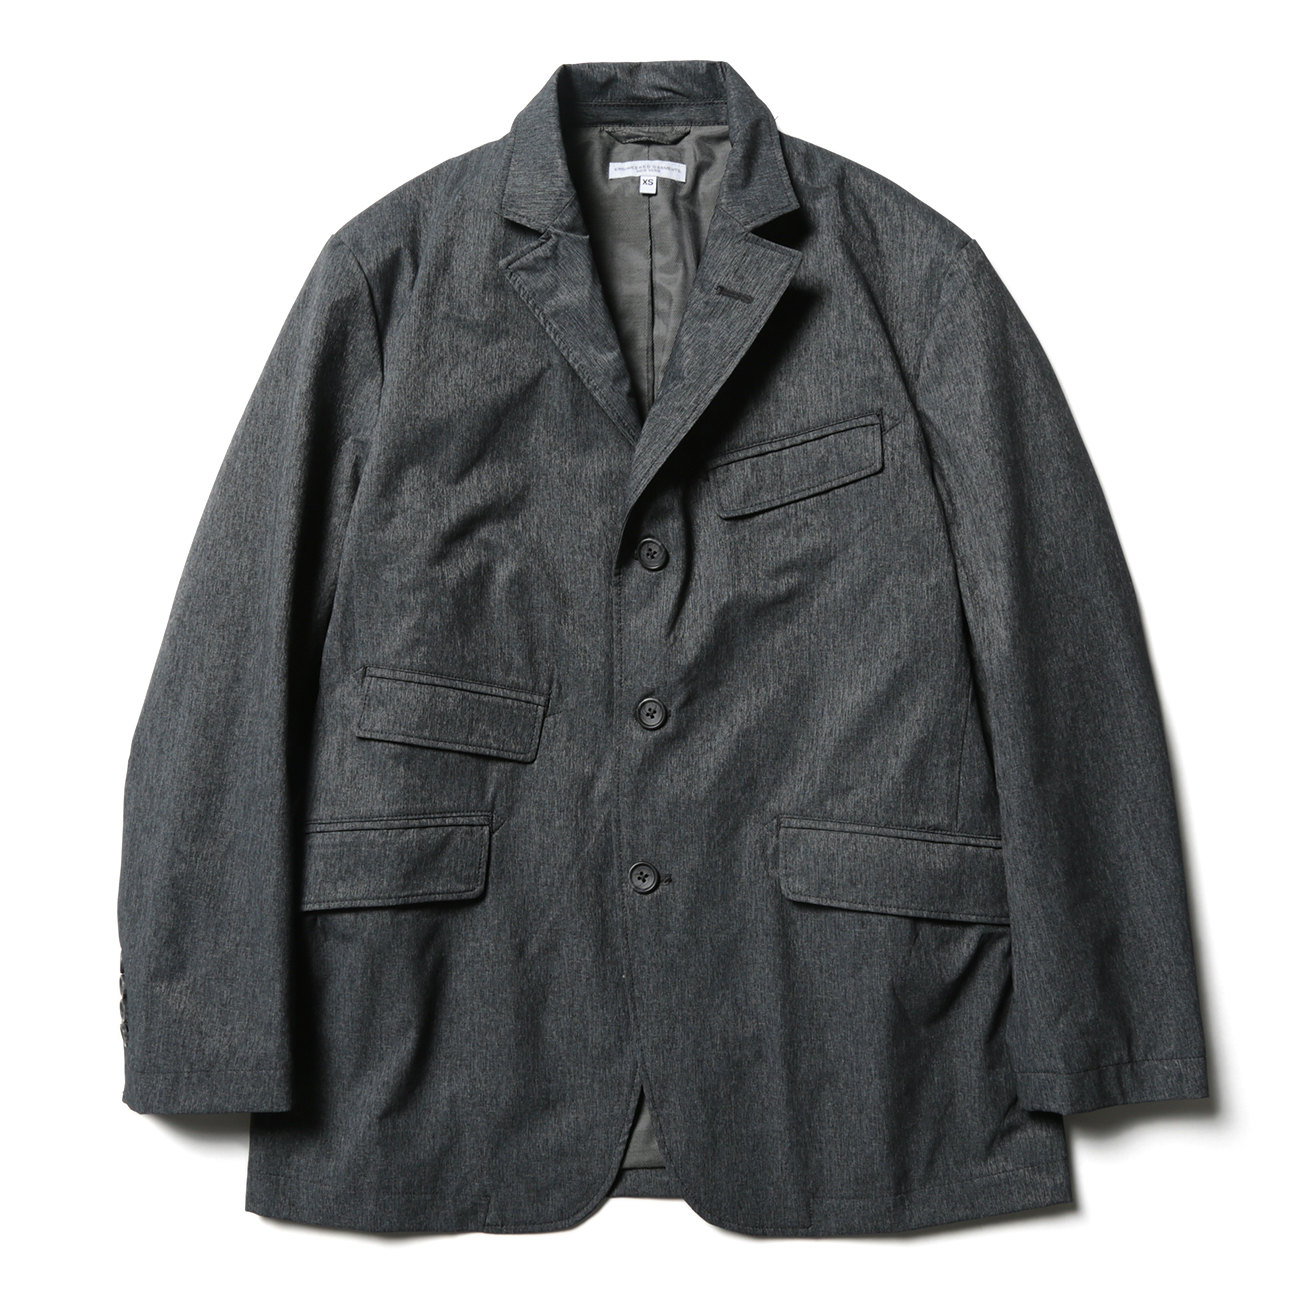 Andover Jacket - Polyester Microfiber - H.Charcoal